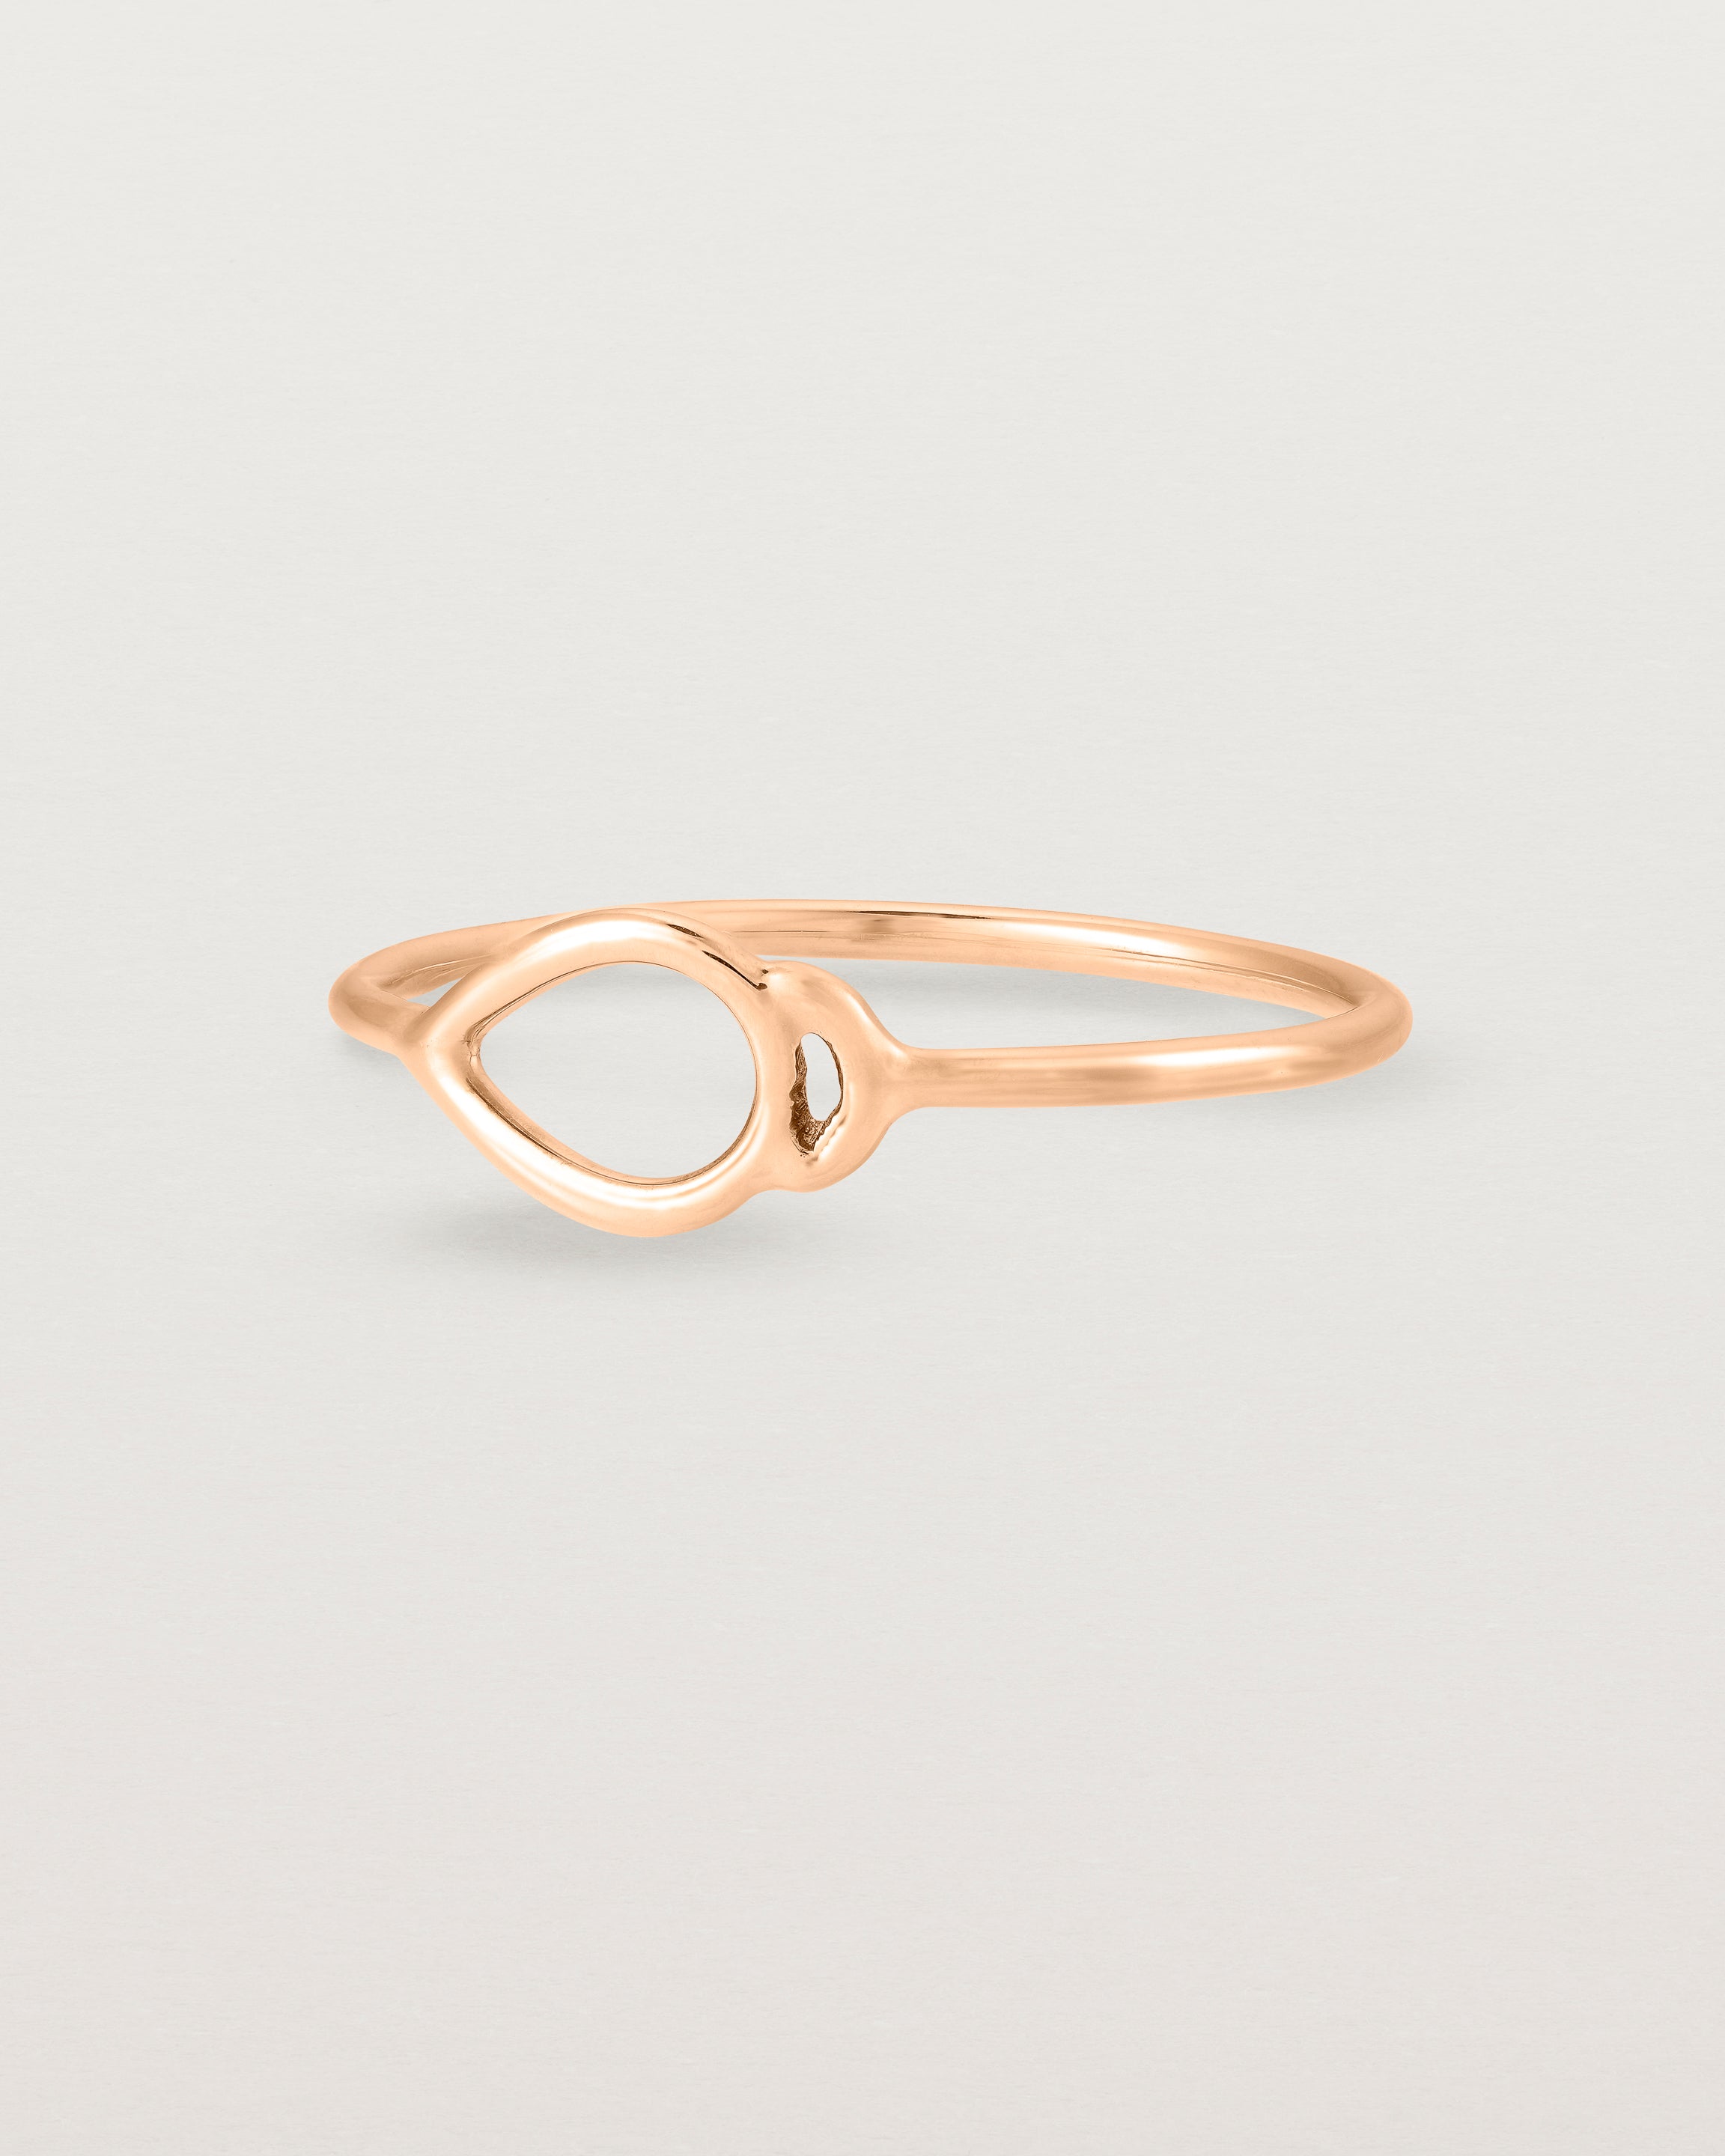 Angled view of the Oana Ring in Rose Gold.